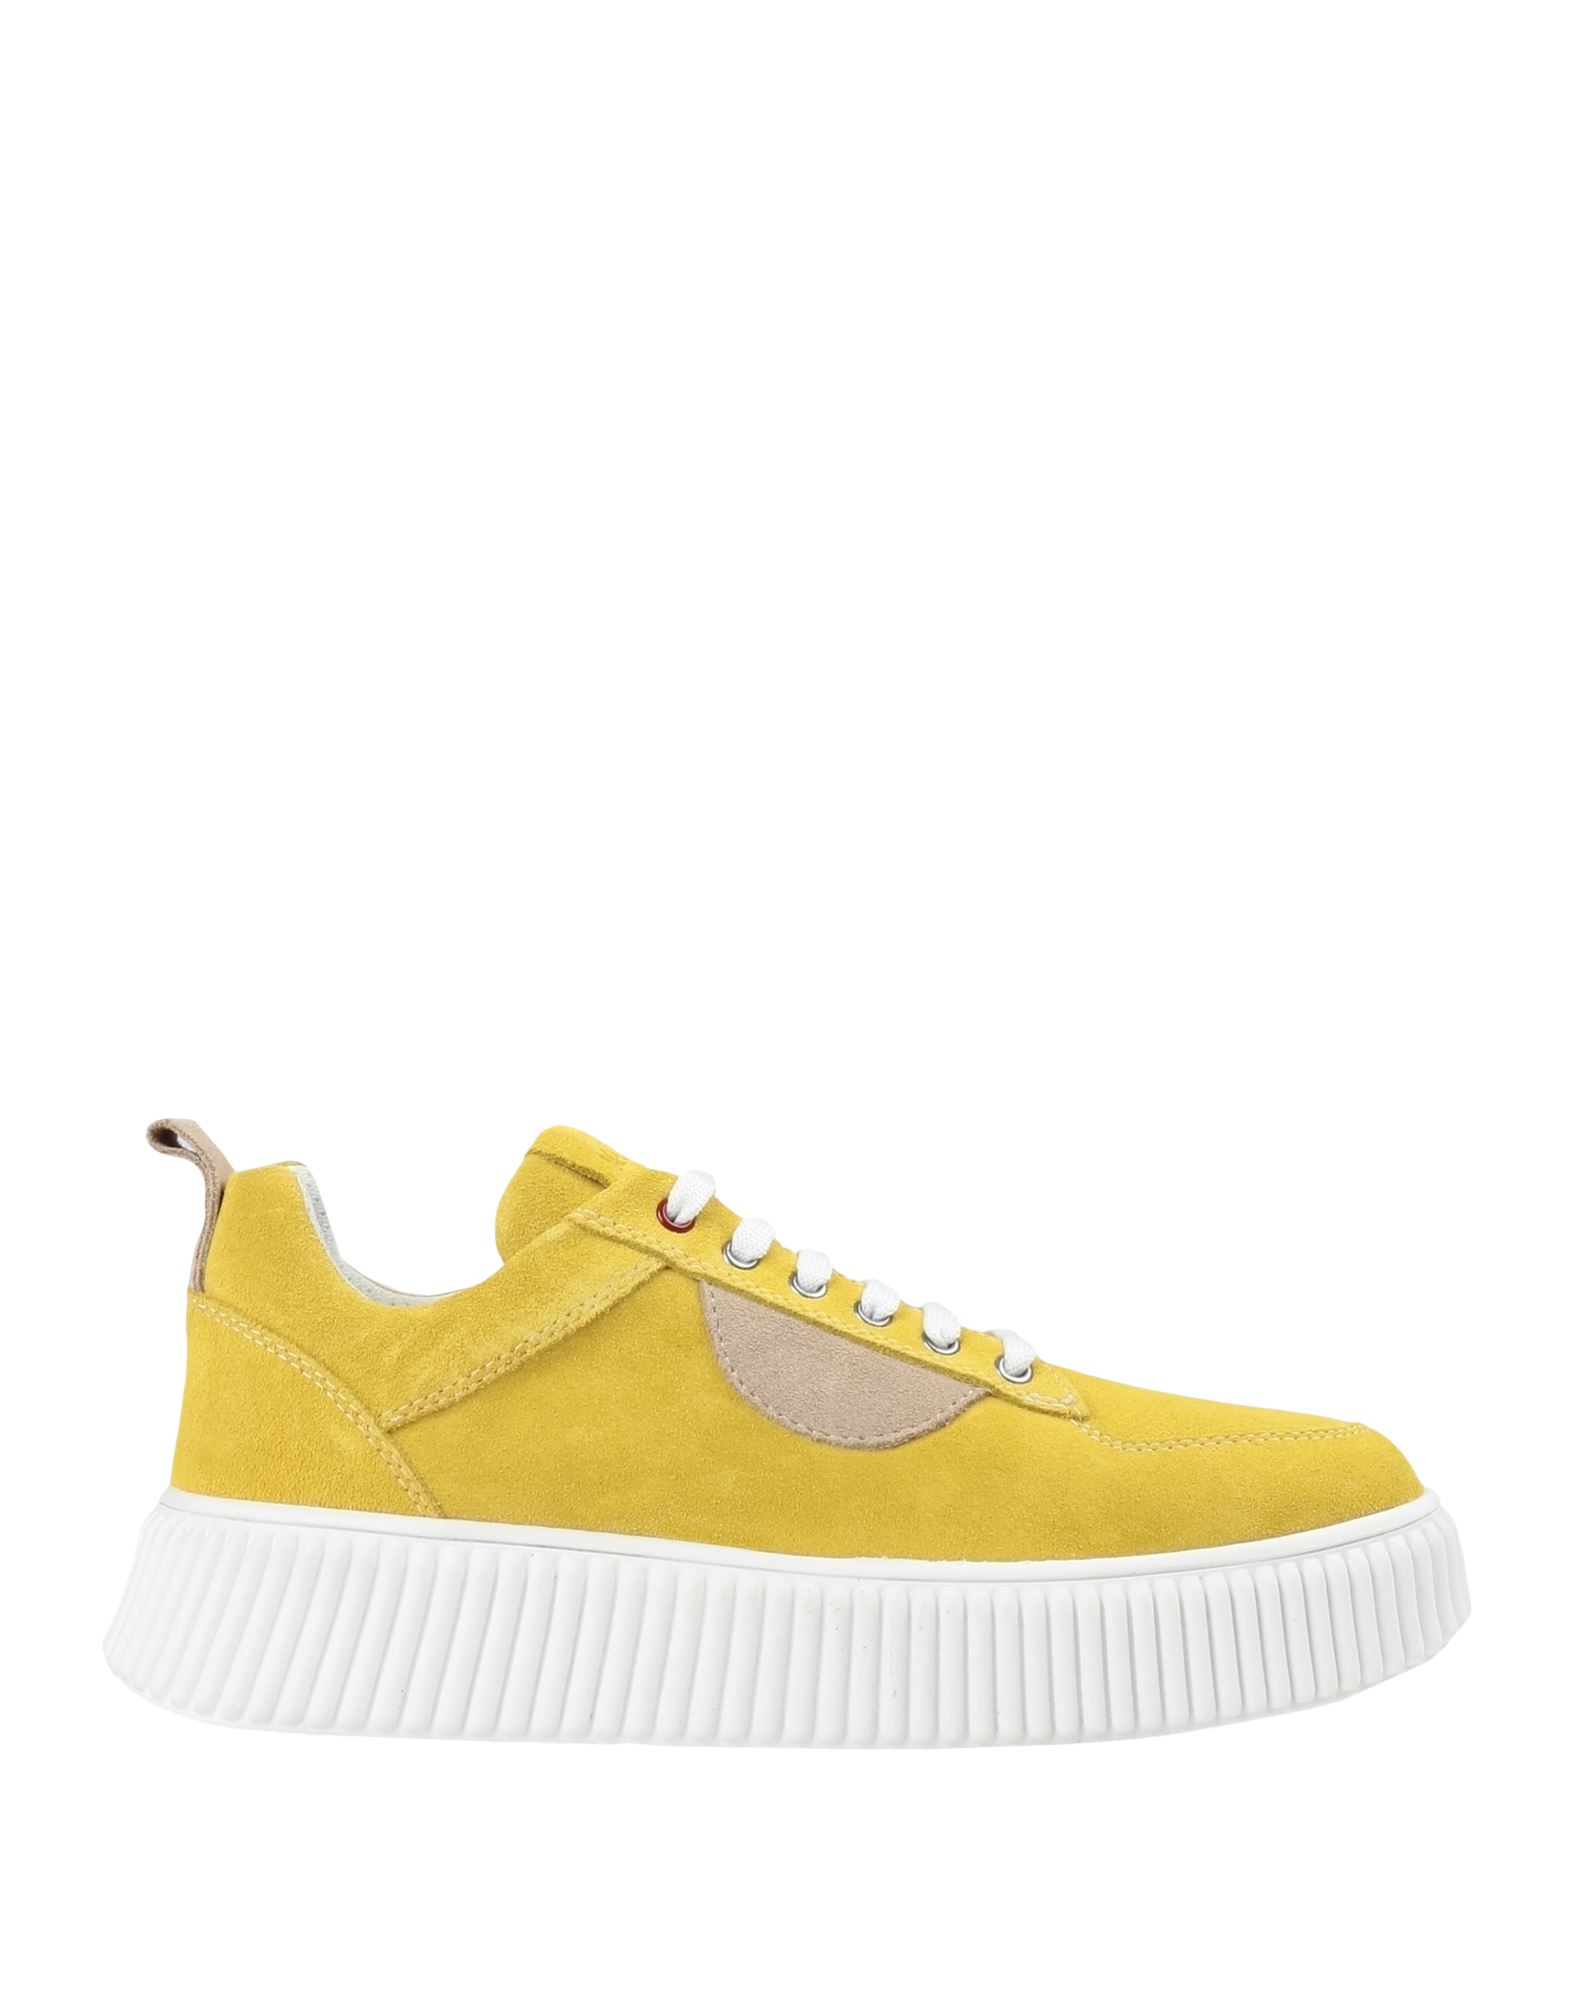 Max & Co . Woman Sneakers Light Yellow Size 9 Soft Leather